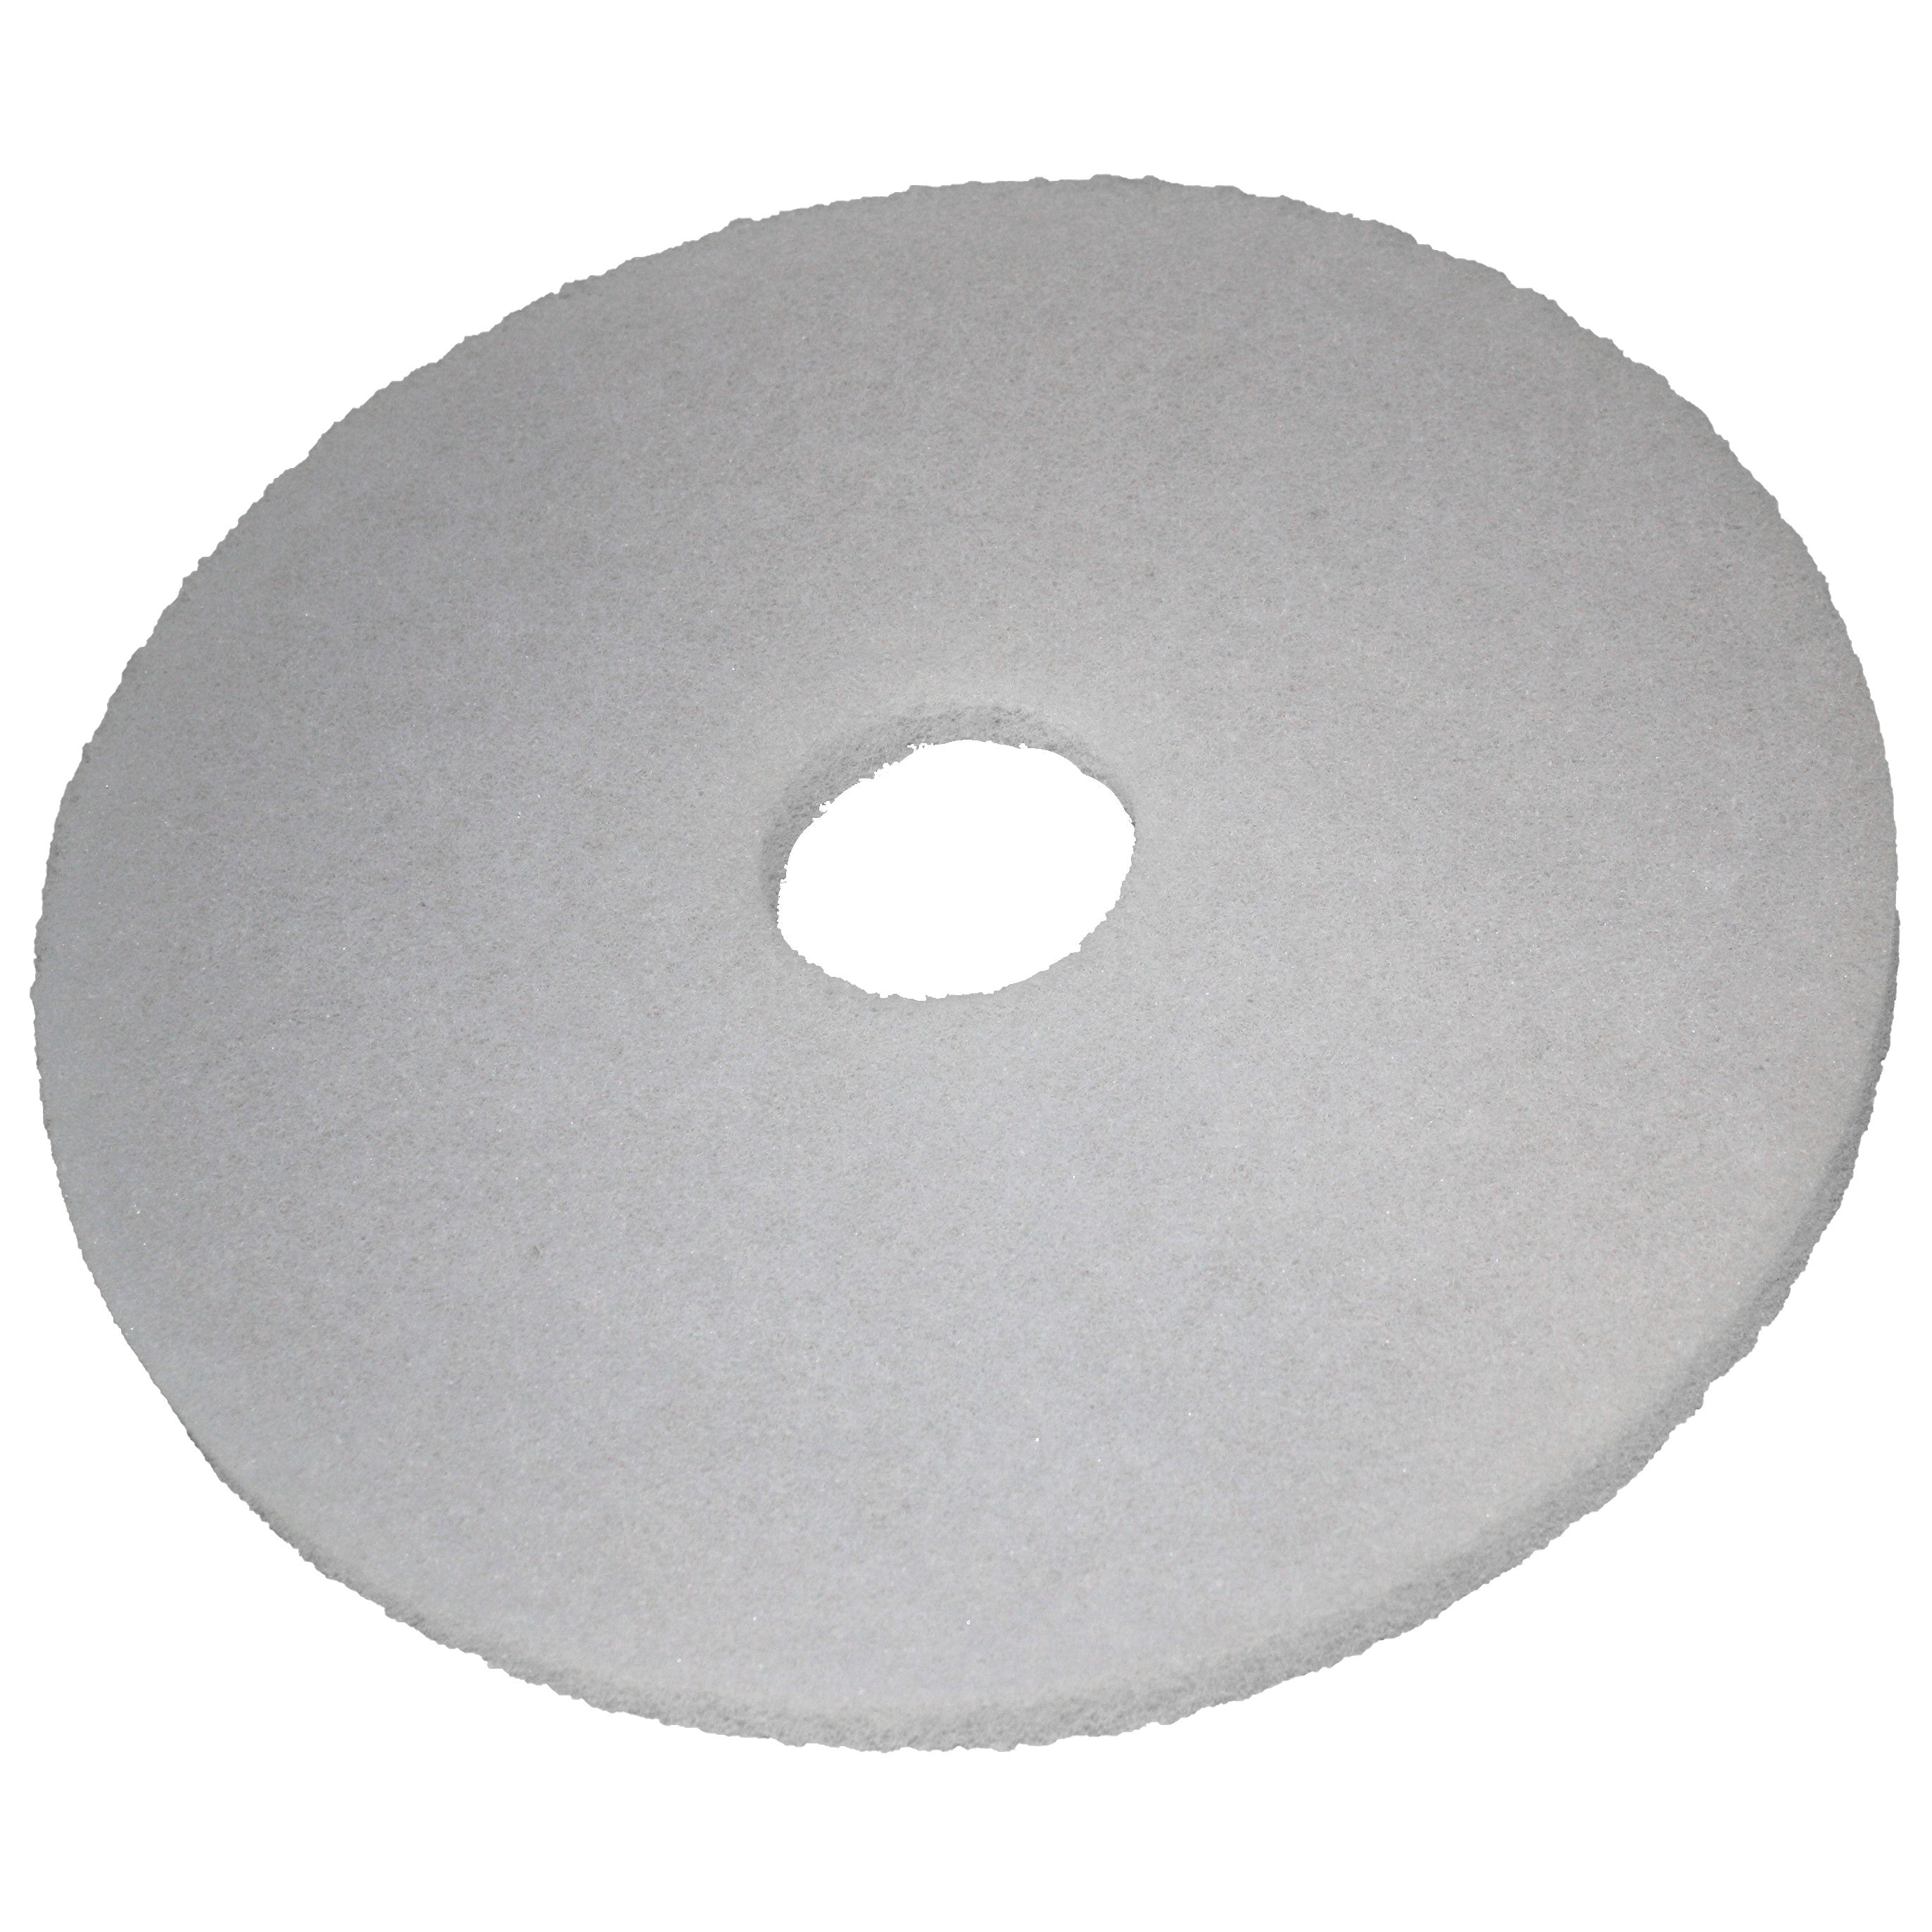 Pad weiss, Ø 254 mm, Polyester